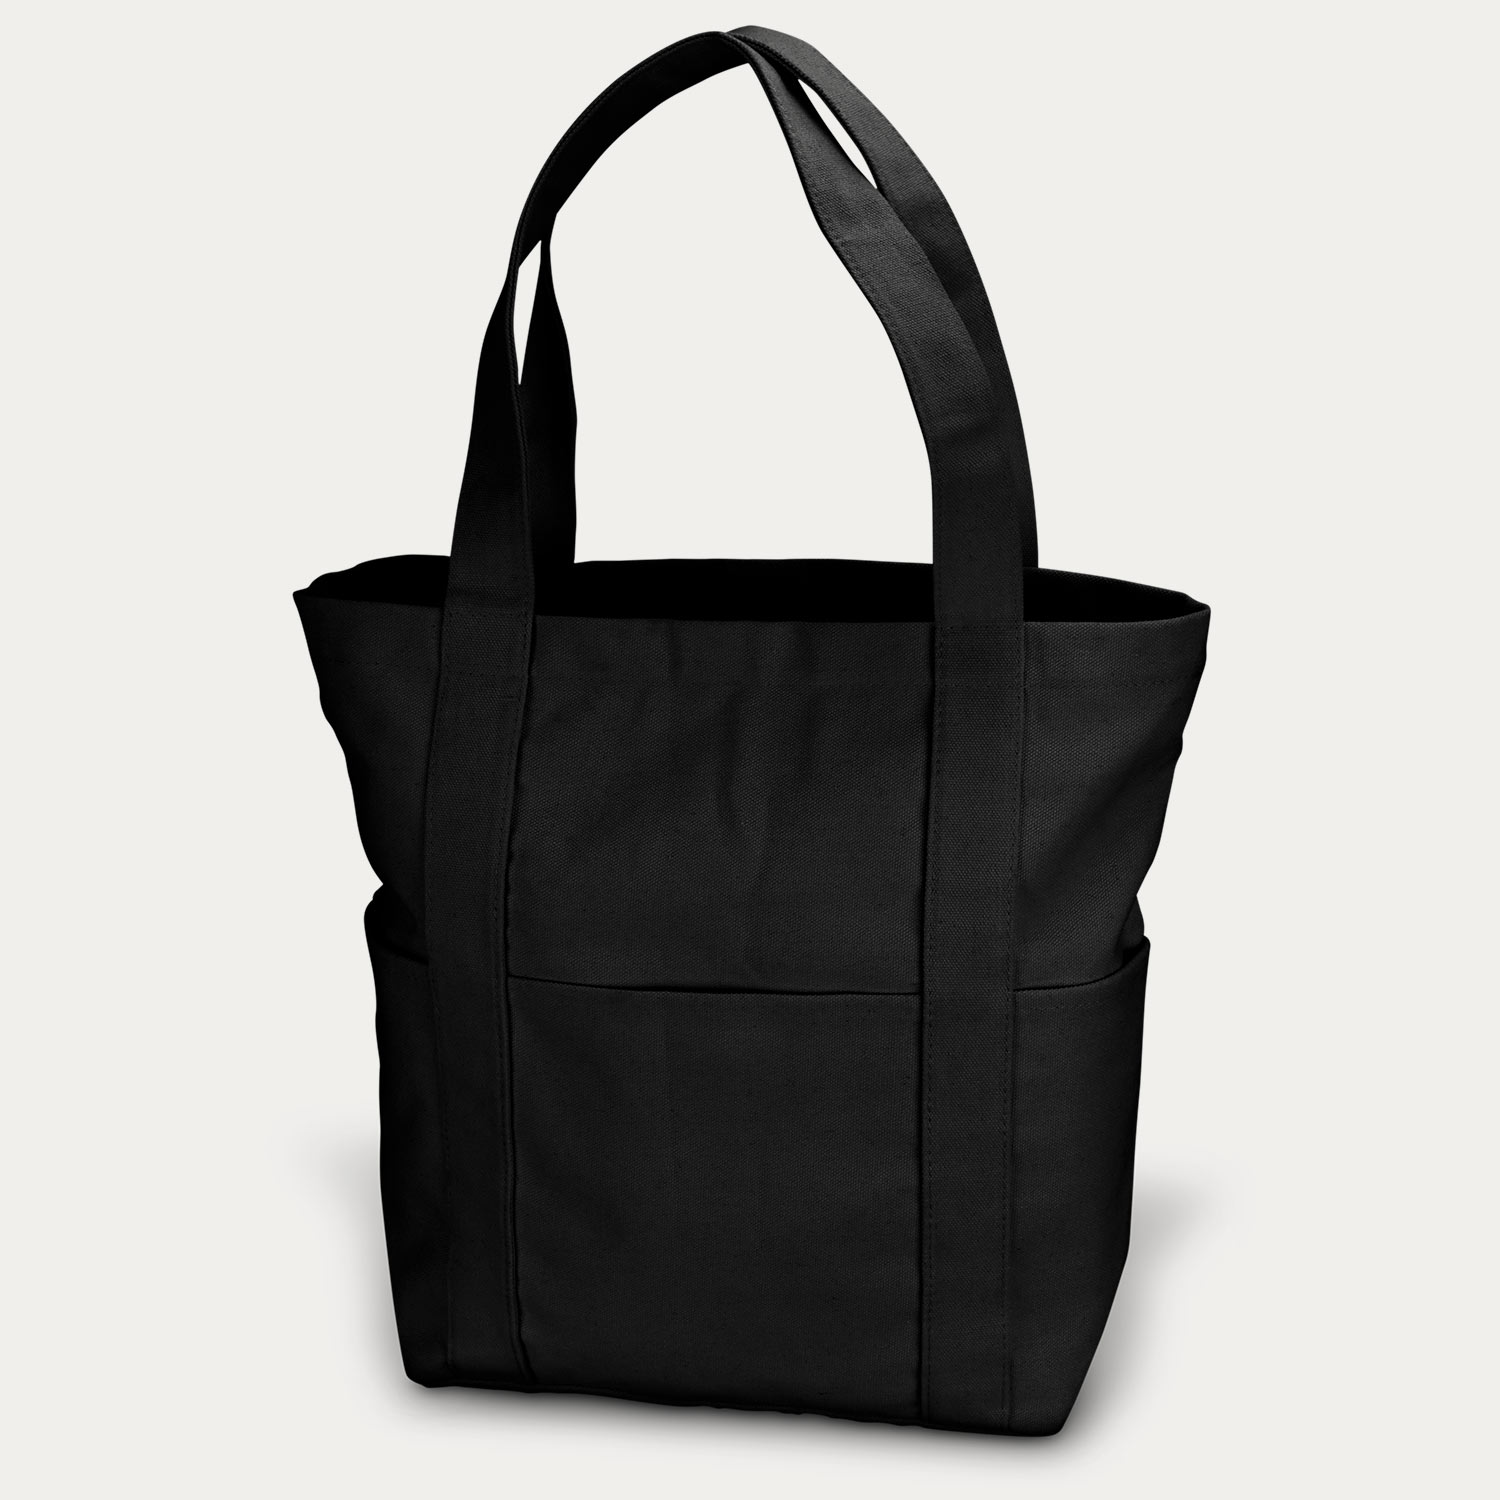 Amsterdam Canvas Tote Bag | PrimoProducts